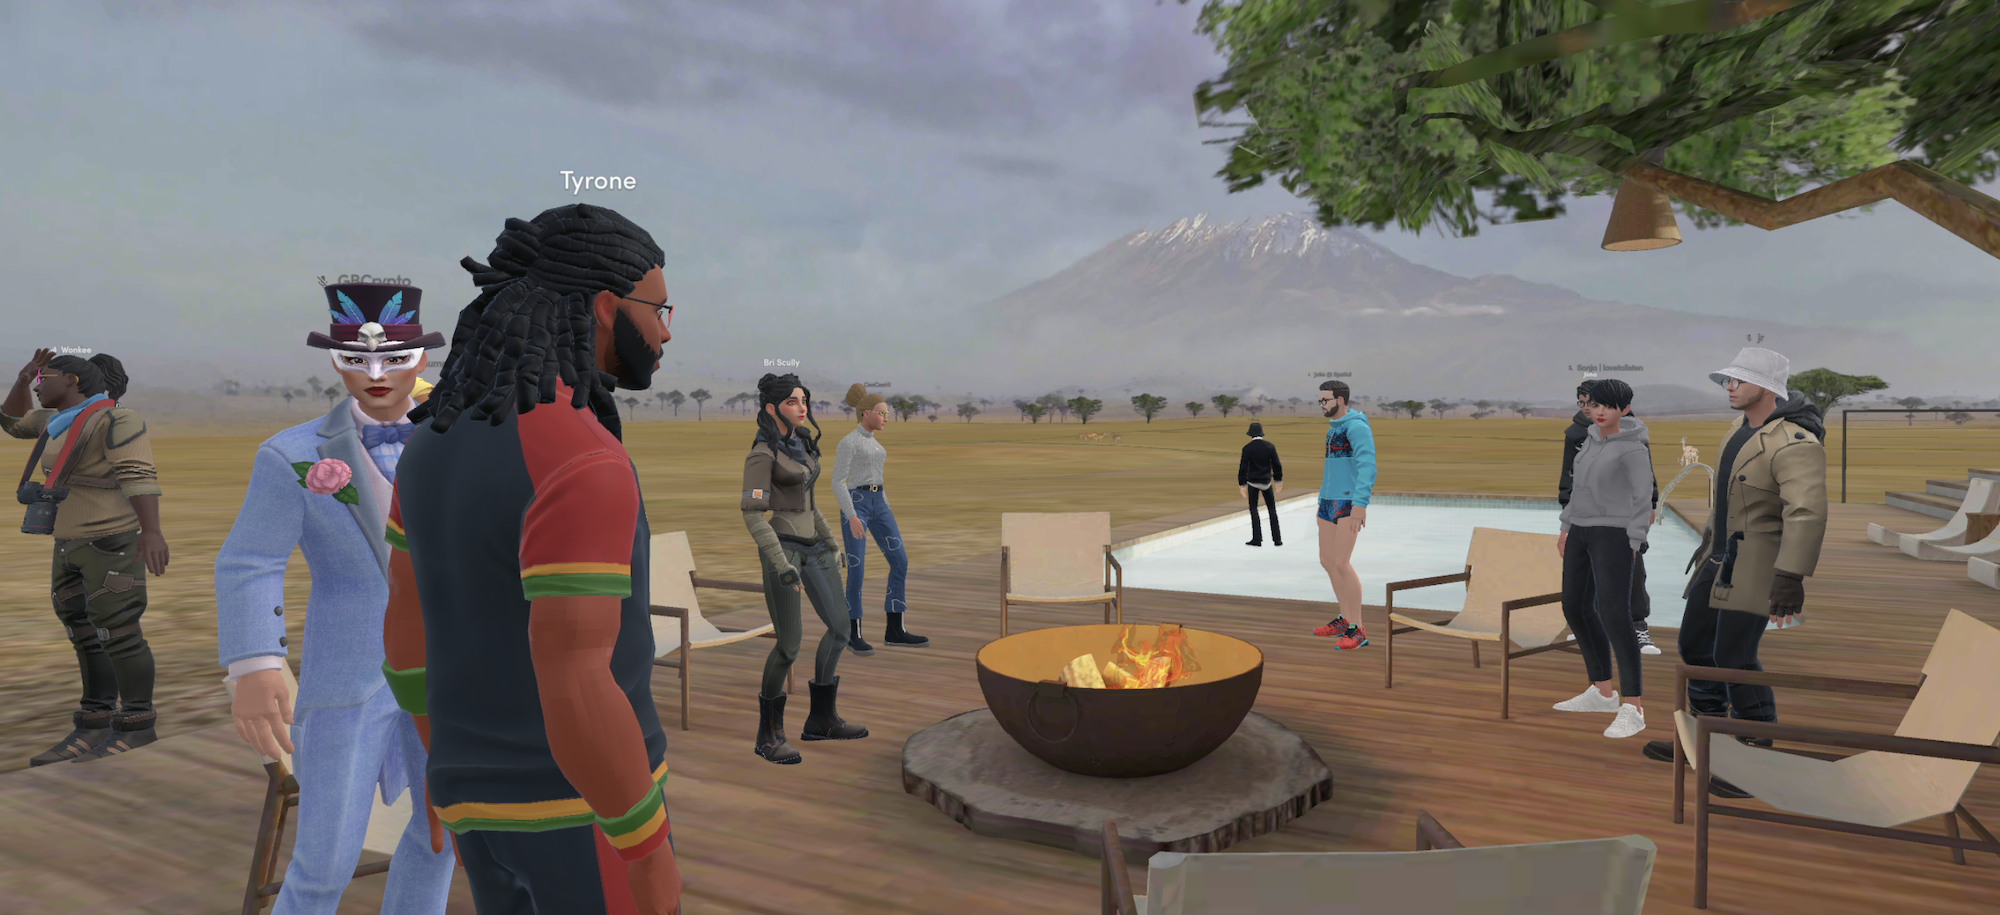 avatars around a fire in a virutal outdoor space